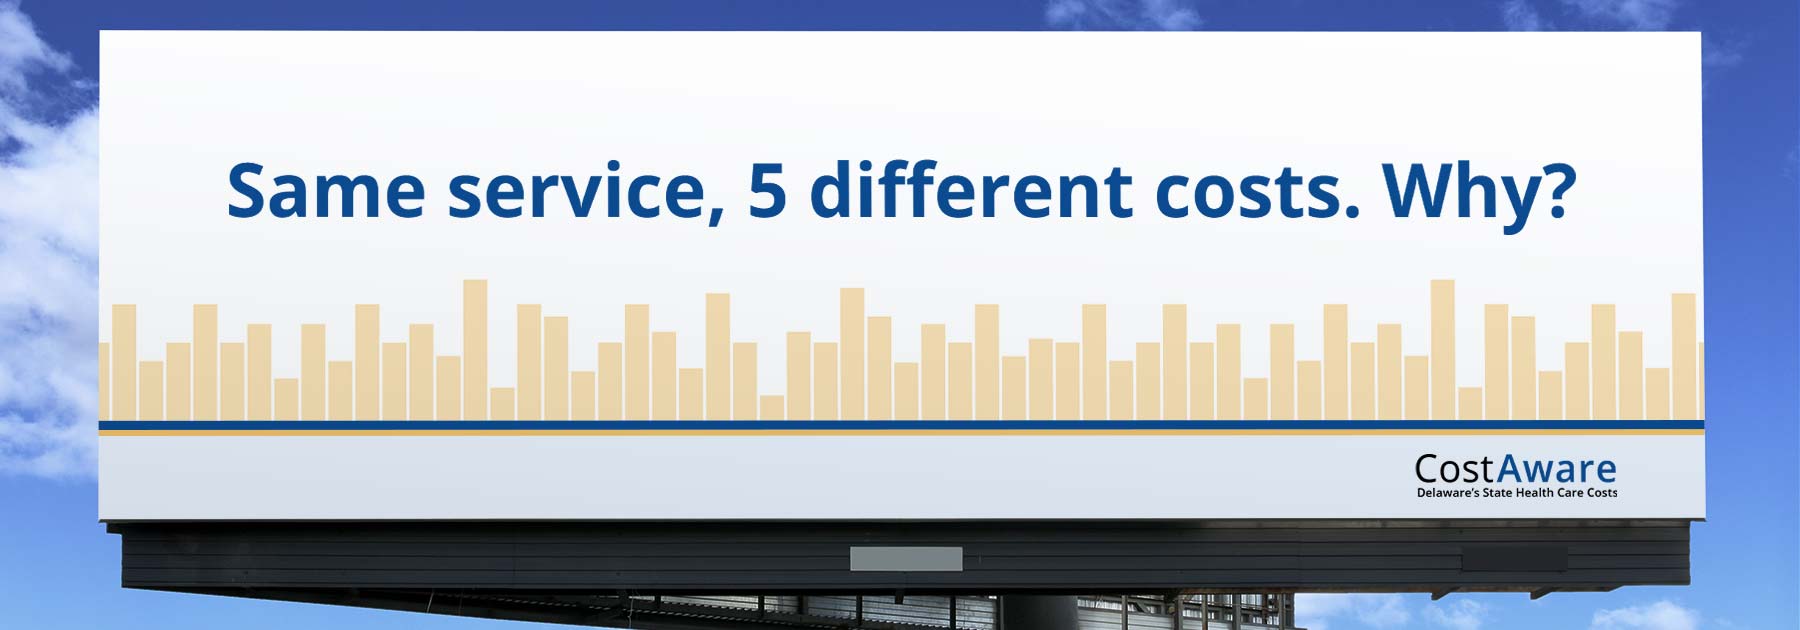 Billboard: Same service, 5 different costs. Why?